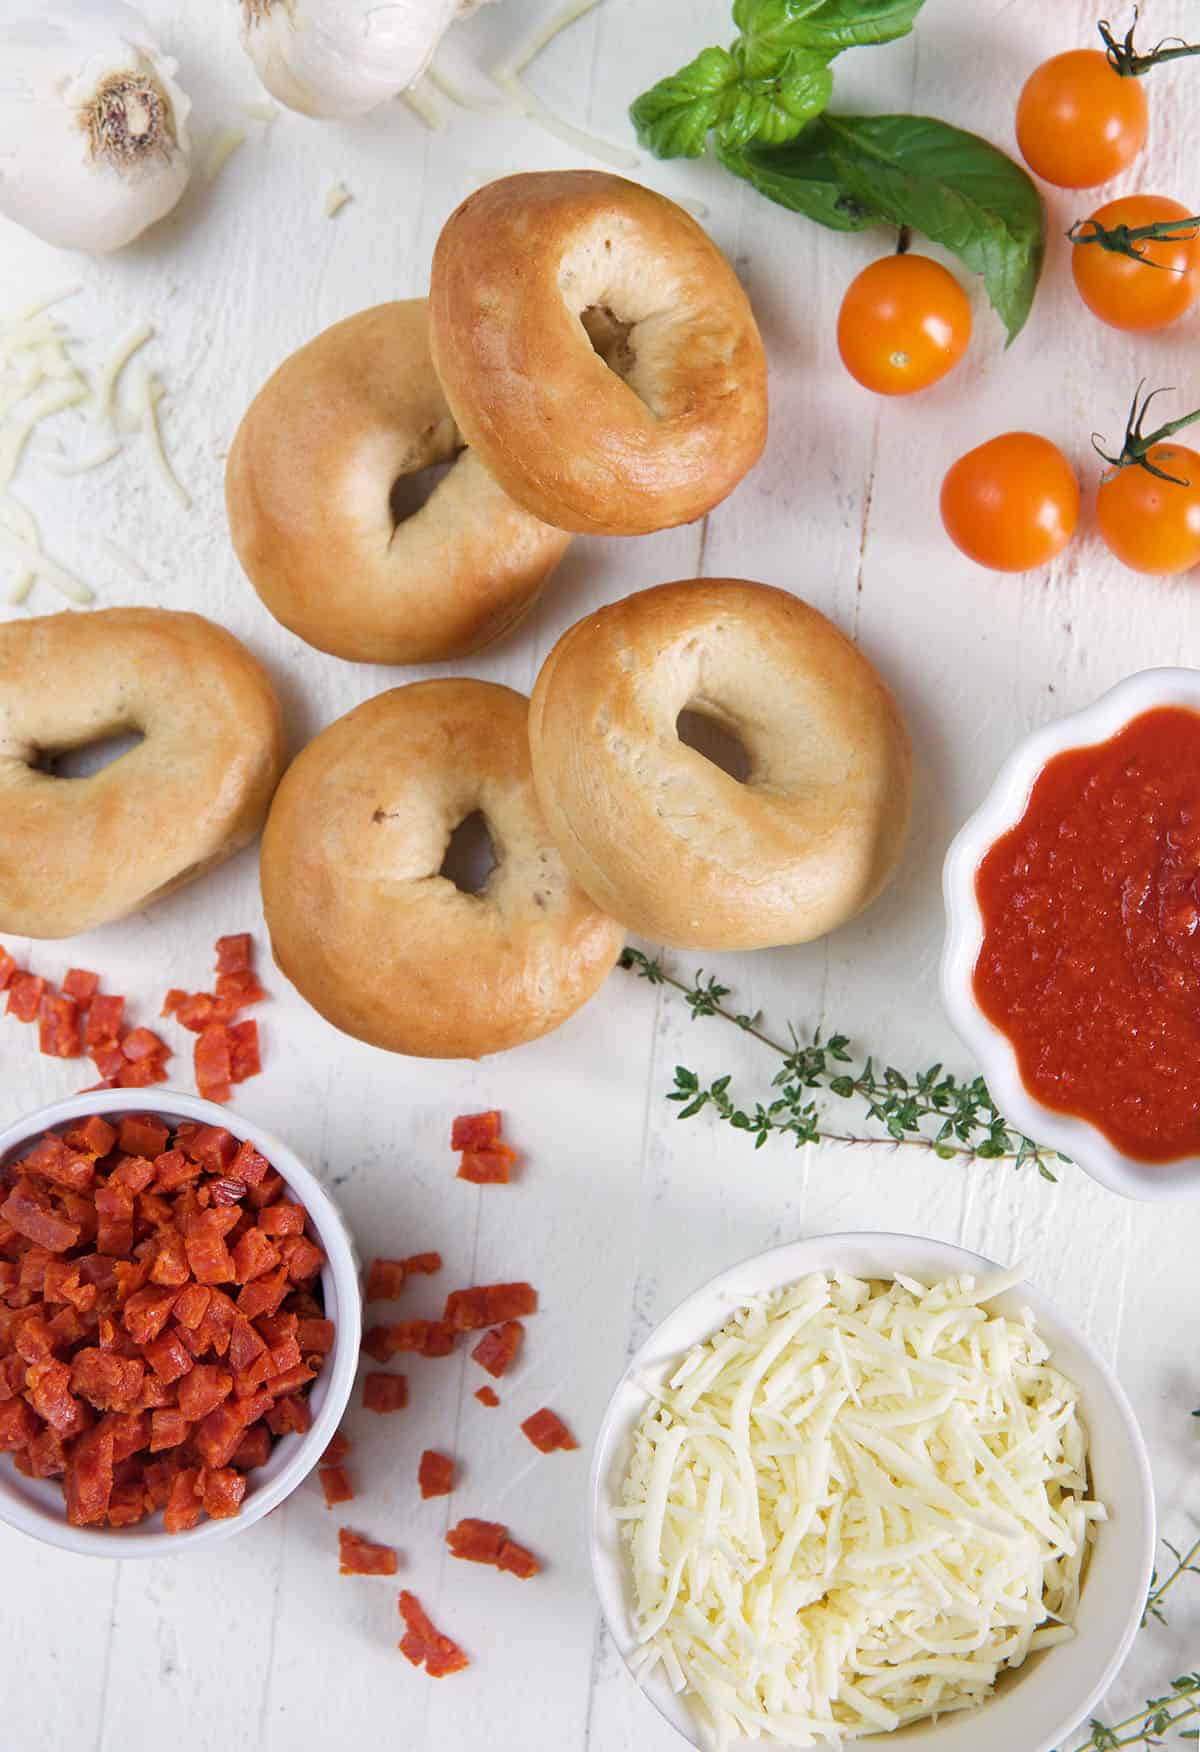 The ingredients for mini pizza bagels are placed on a white surface. 